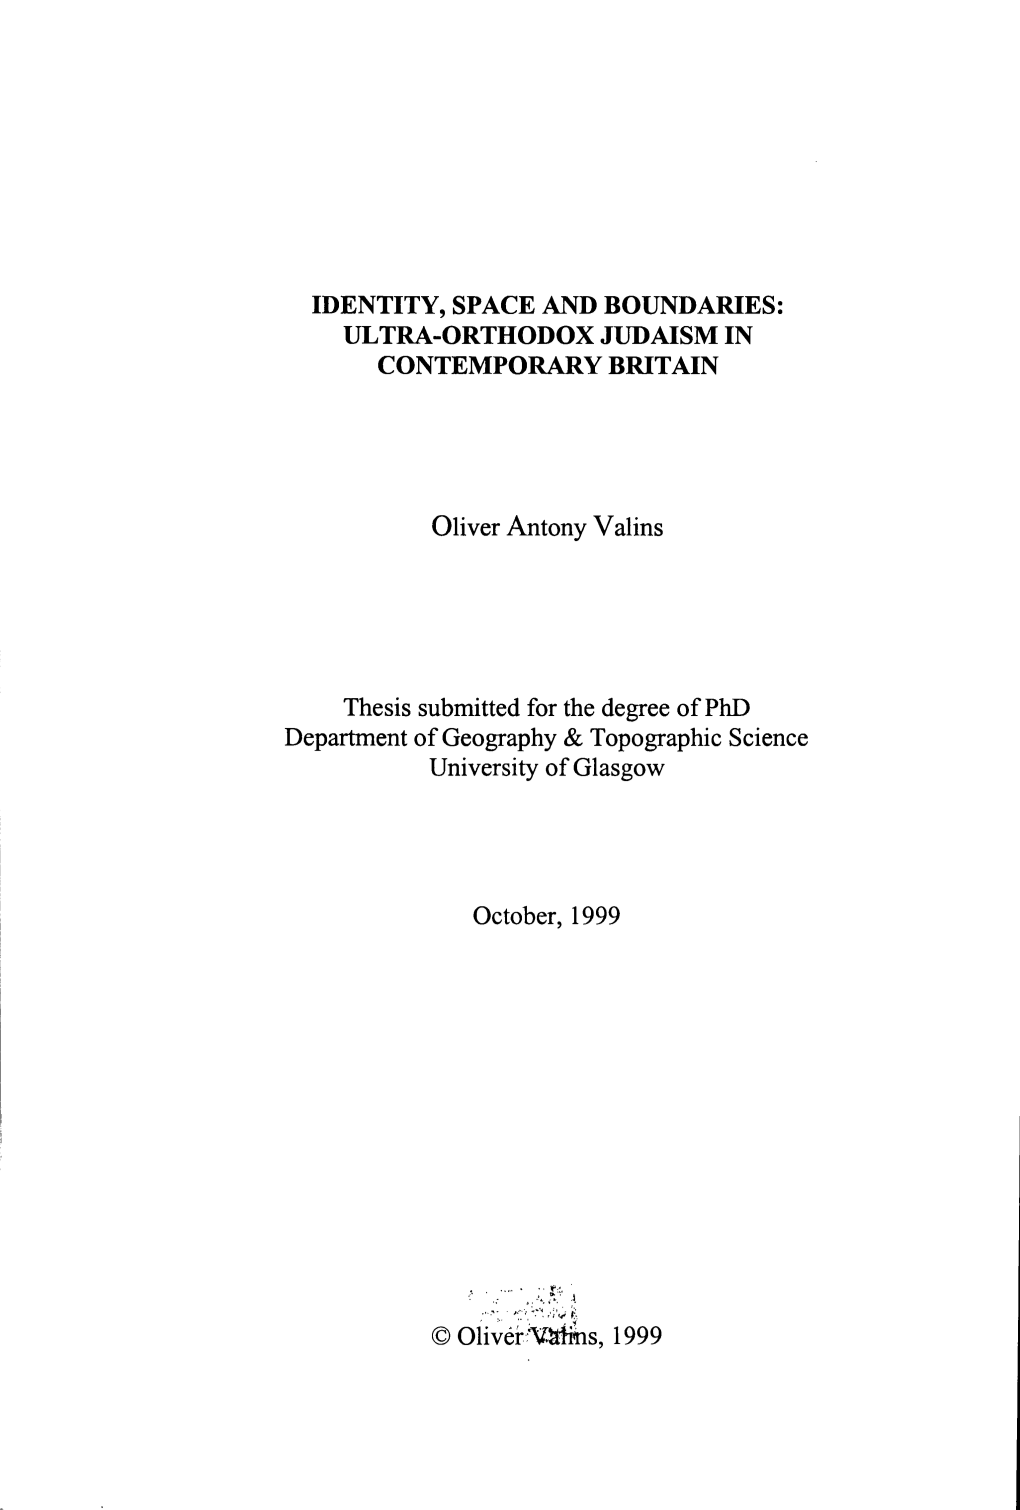 ULTRA-ORTHODOX JUDAISM in CONTEMPORARY BRITAIN Oliver Antony Valins Thesis Submitted for The